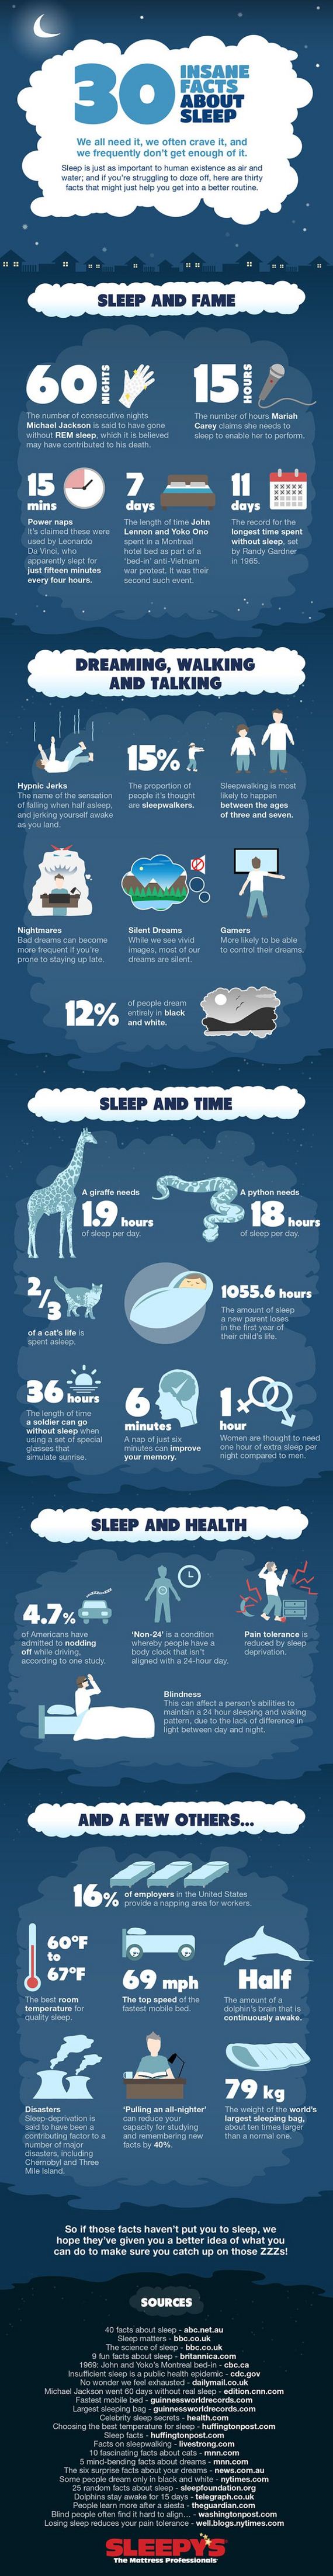 facts_about_sleep